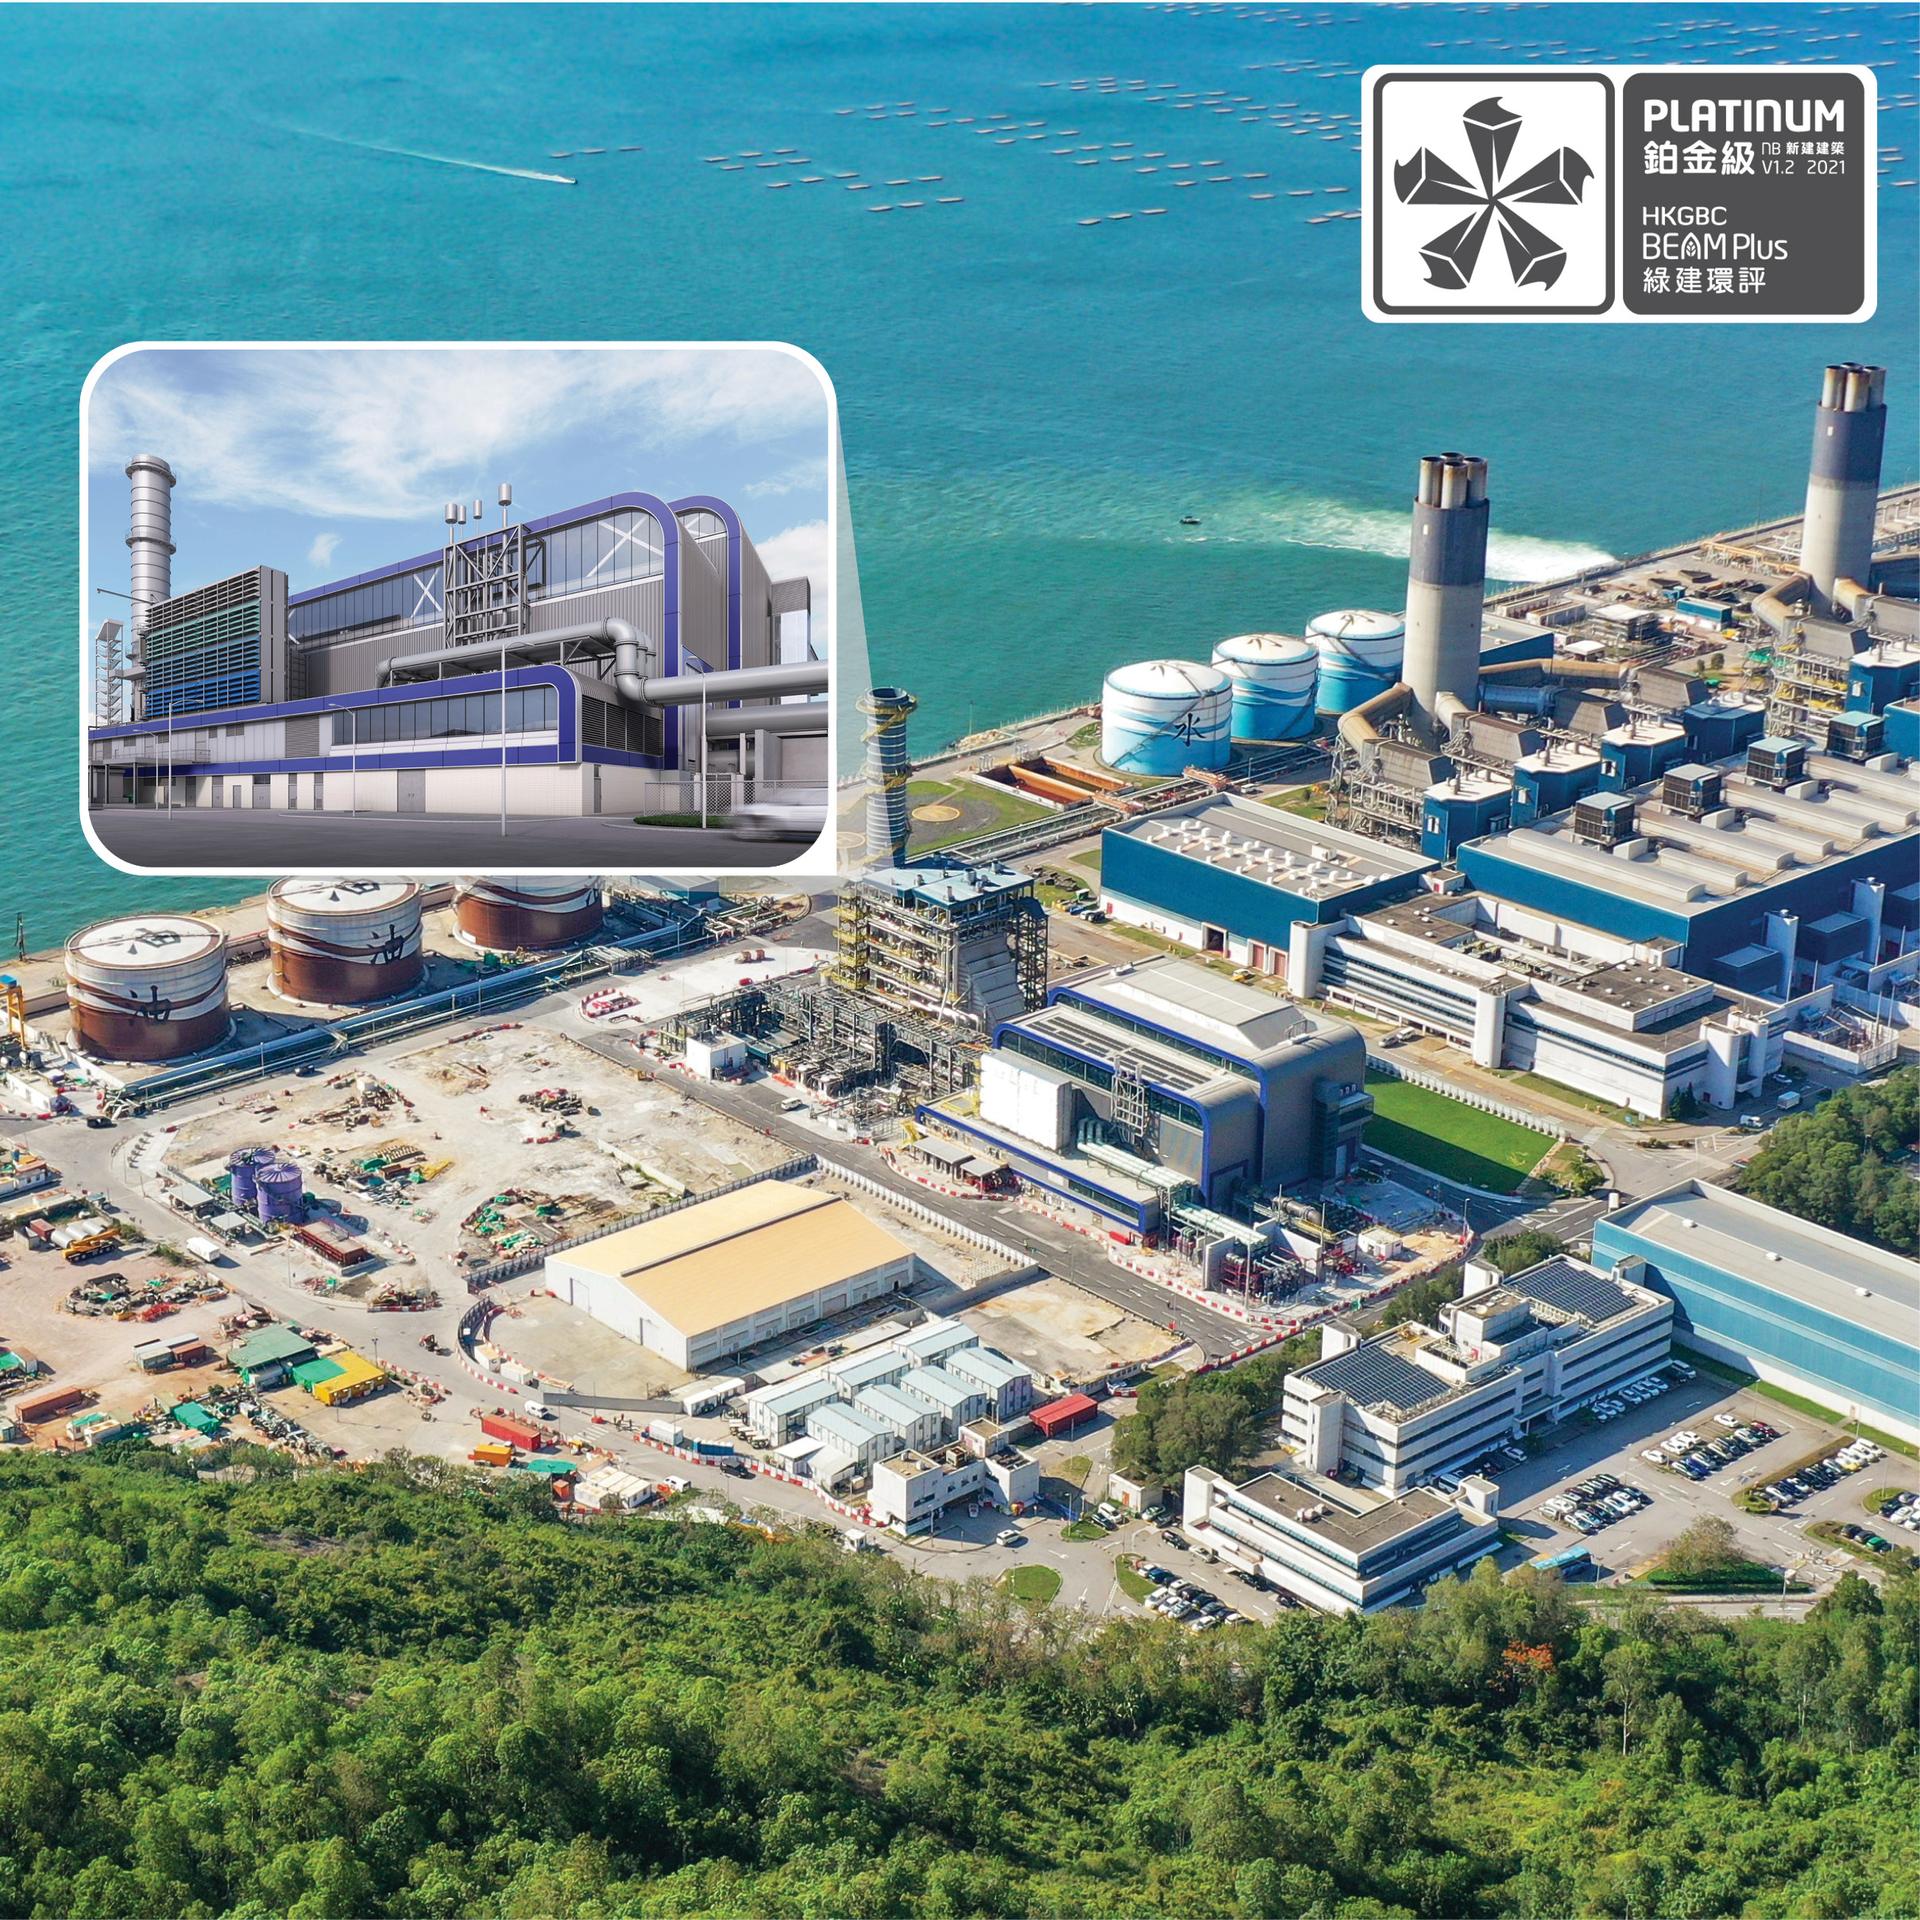 Black Point Power Station Unit D1 civil works project recognised for sustainability